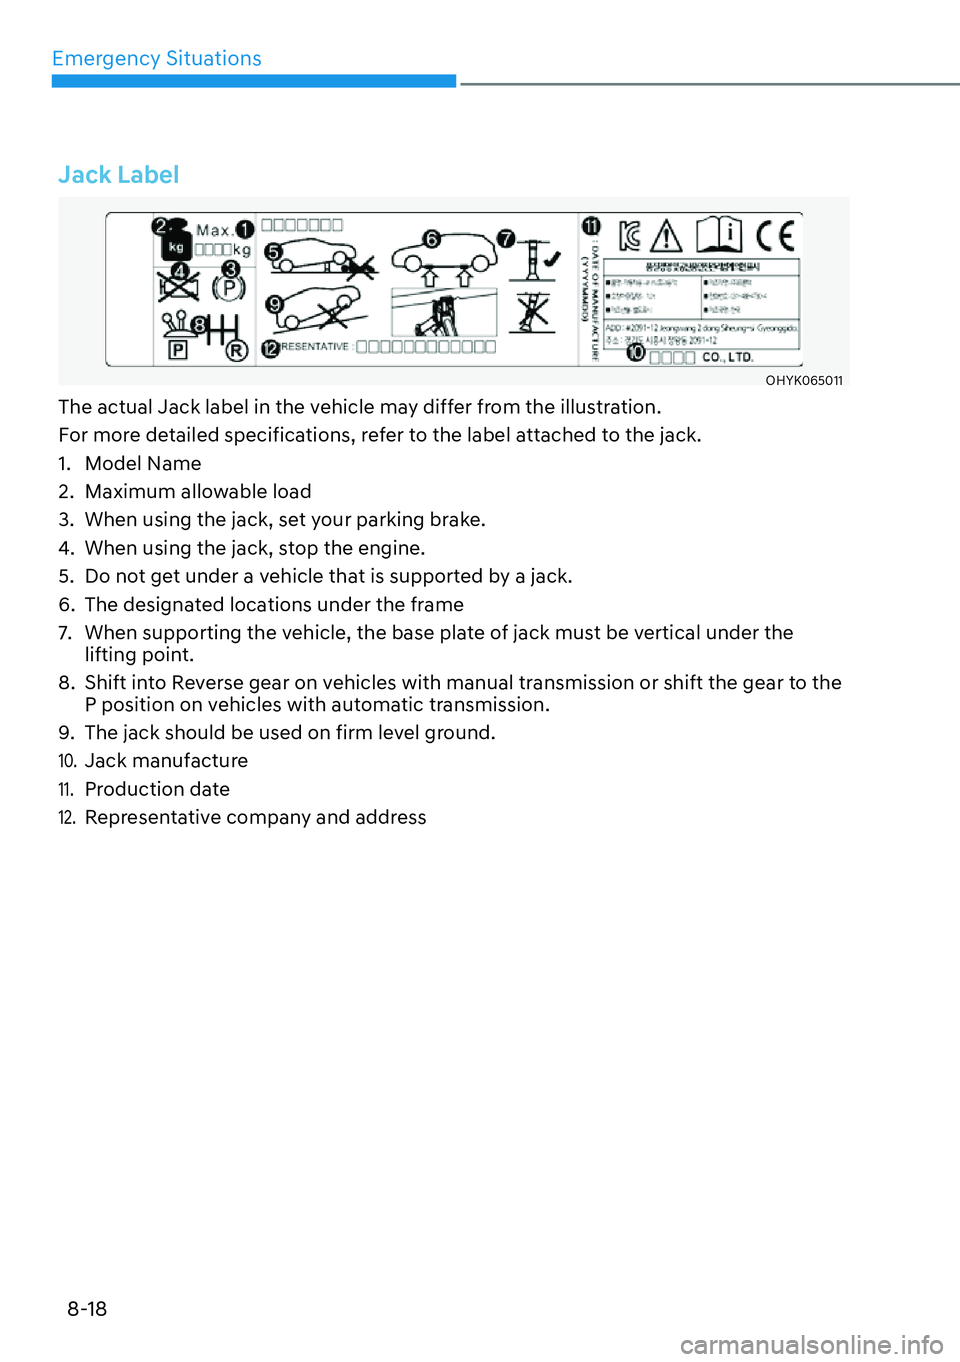 HYUNDAI GENESIS G70 2022  Owners Manual Emergency Situations
8-18
Jack Label
OHYK065011
The actual Jack label in the vehicle may differ from the illustration.
For more detailed specifications, refer to the label attached to the jack.
1. Mod